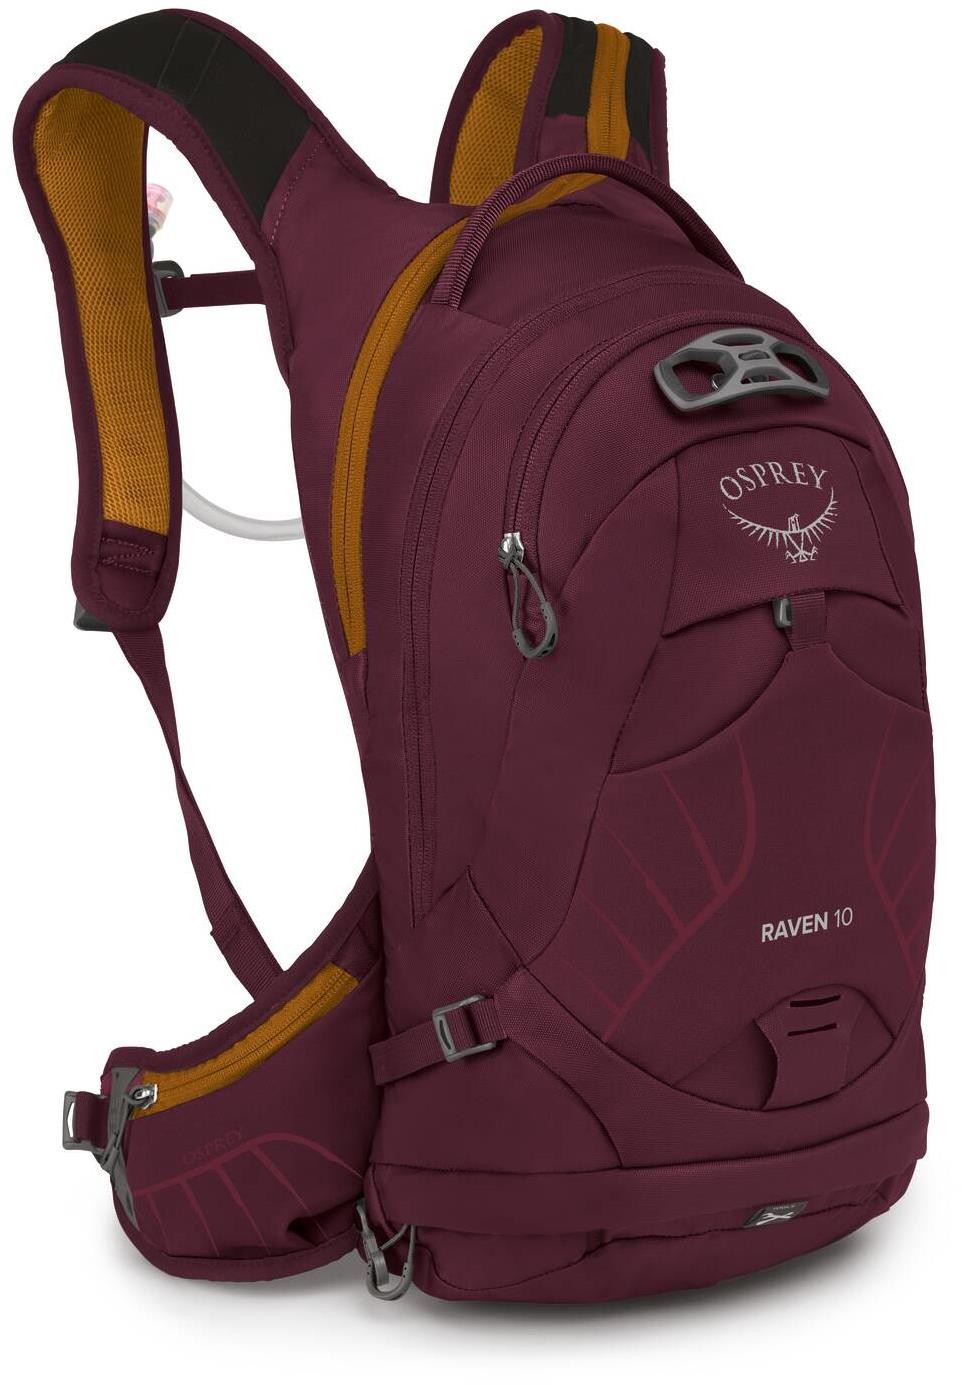 Raven 10 Womens Hydration Pack with 2.5L Reservoir image 0